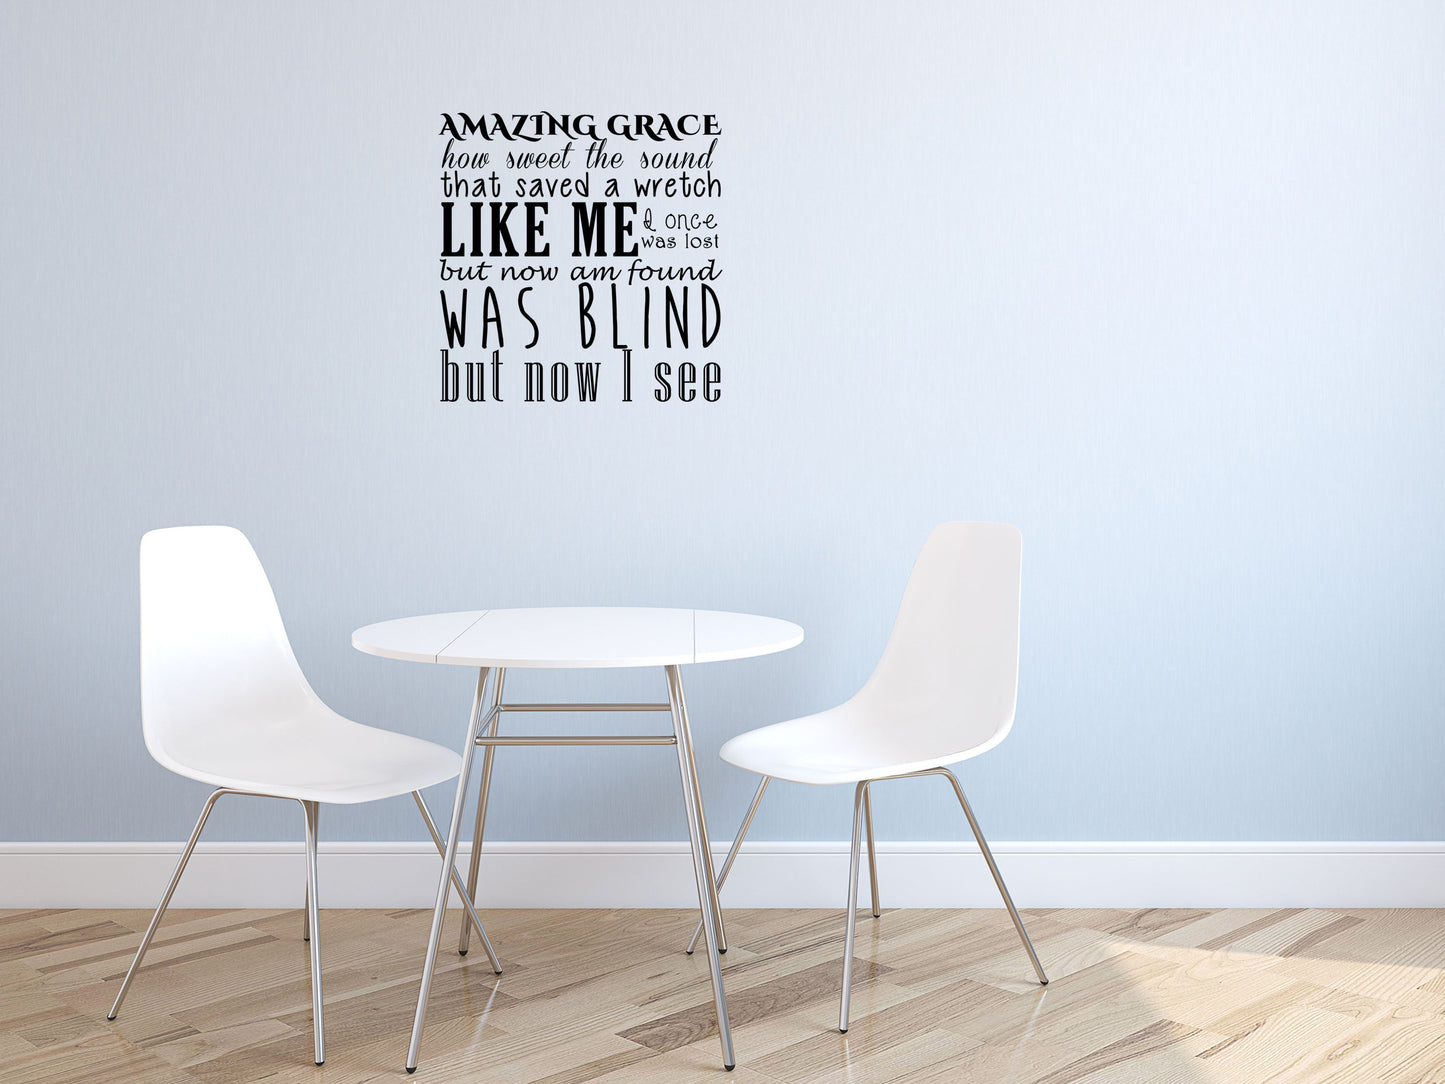 Amazing Grace Inspirational Wall - Hymn Wall Decal - Christian Decor Vinyl Wall Decal Title Done 